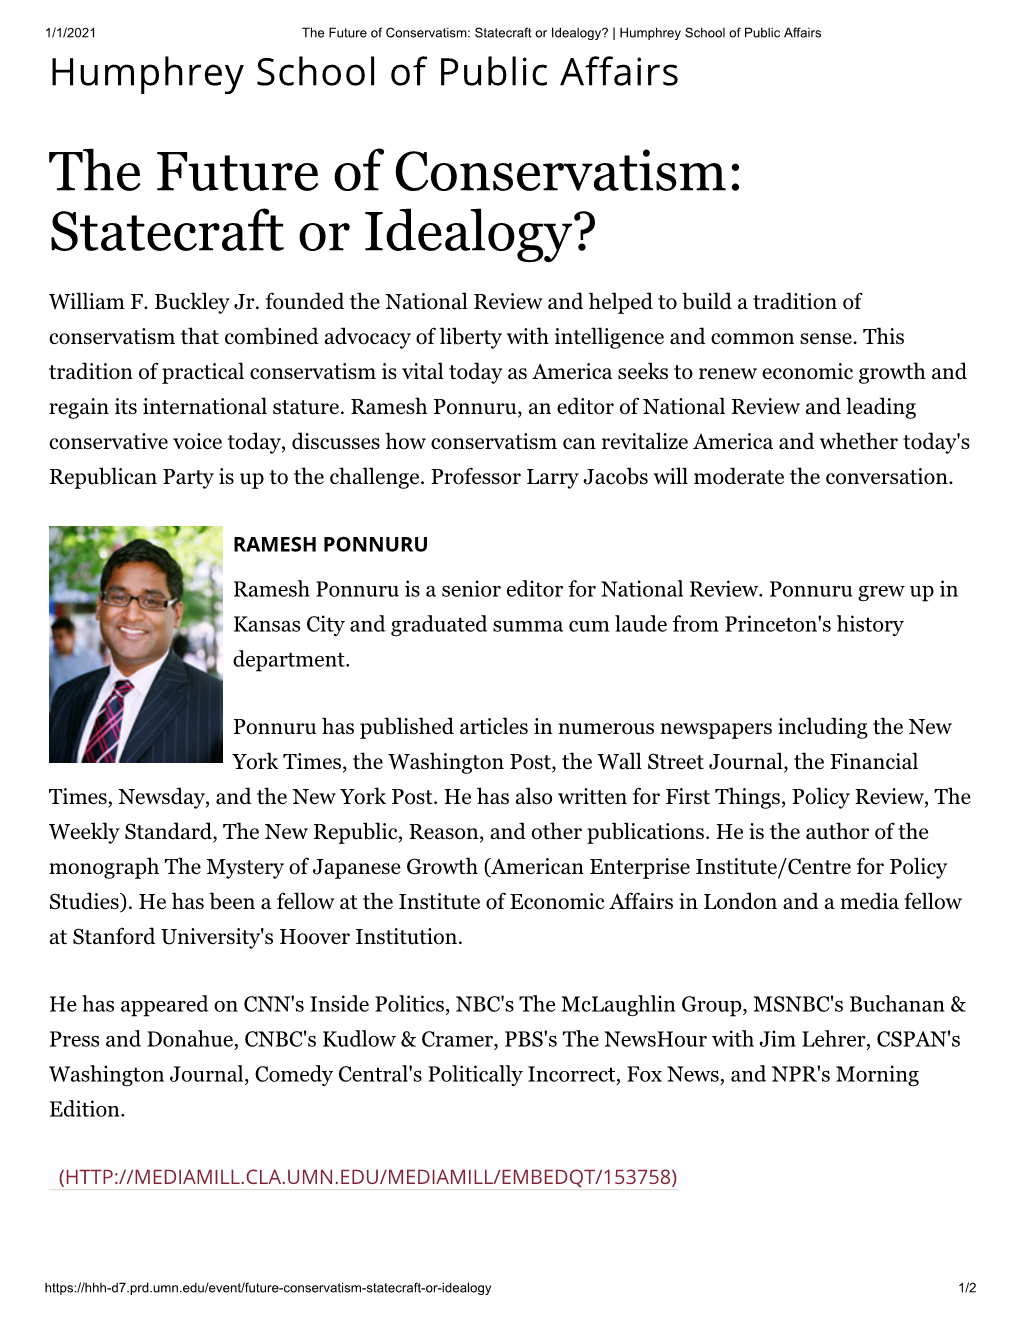 The Future of Conservatism: Statecraft Or Idealogy?